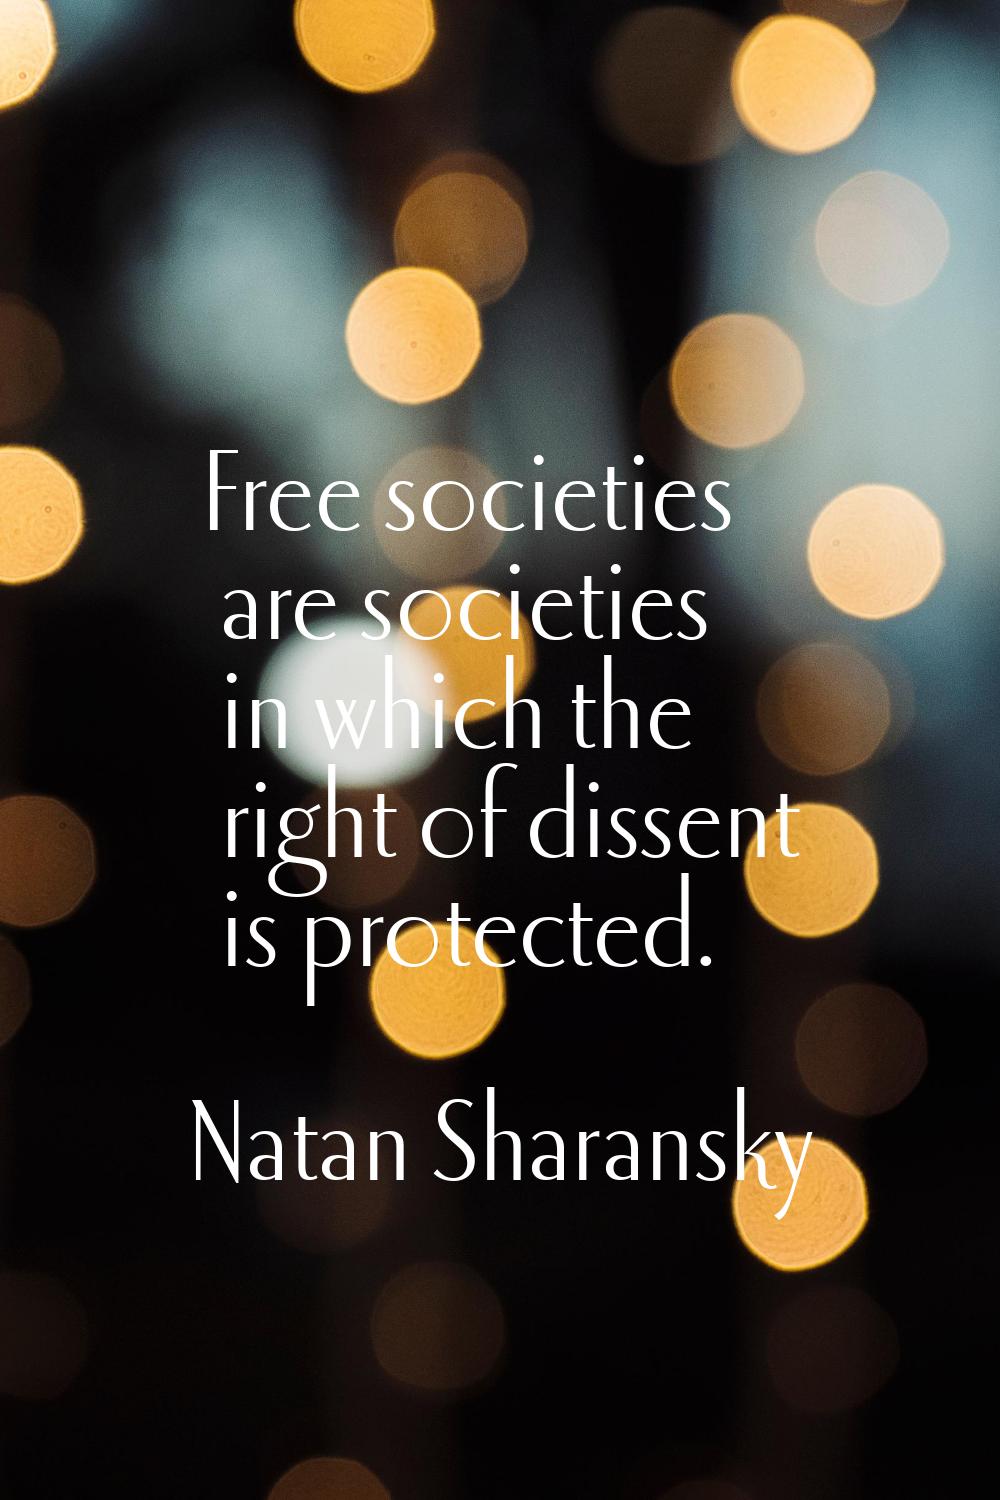 Free societies are societies in which the right of dissent is protected.